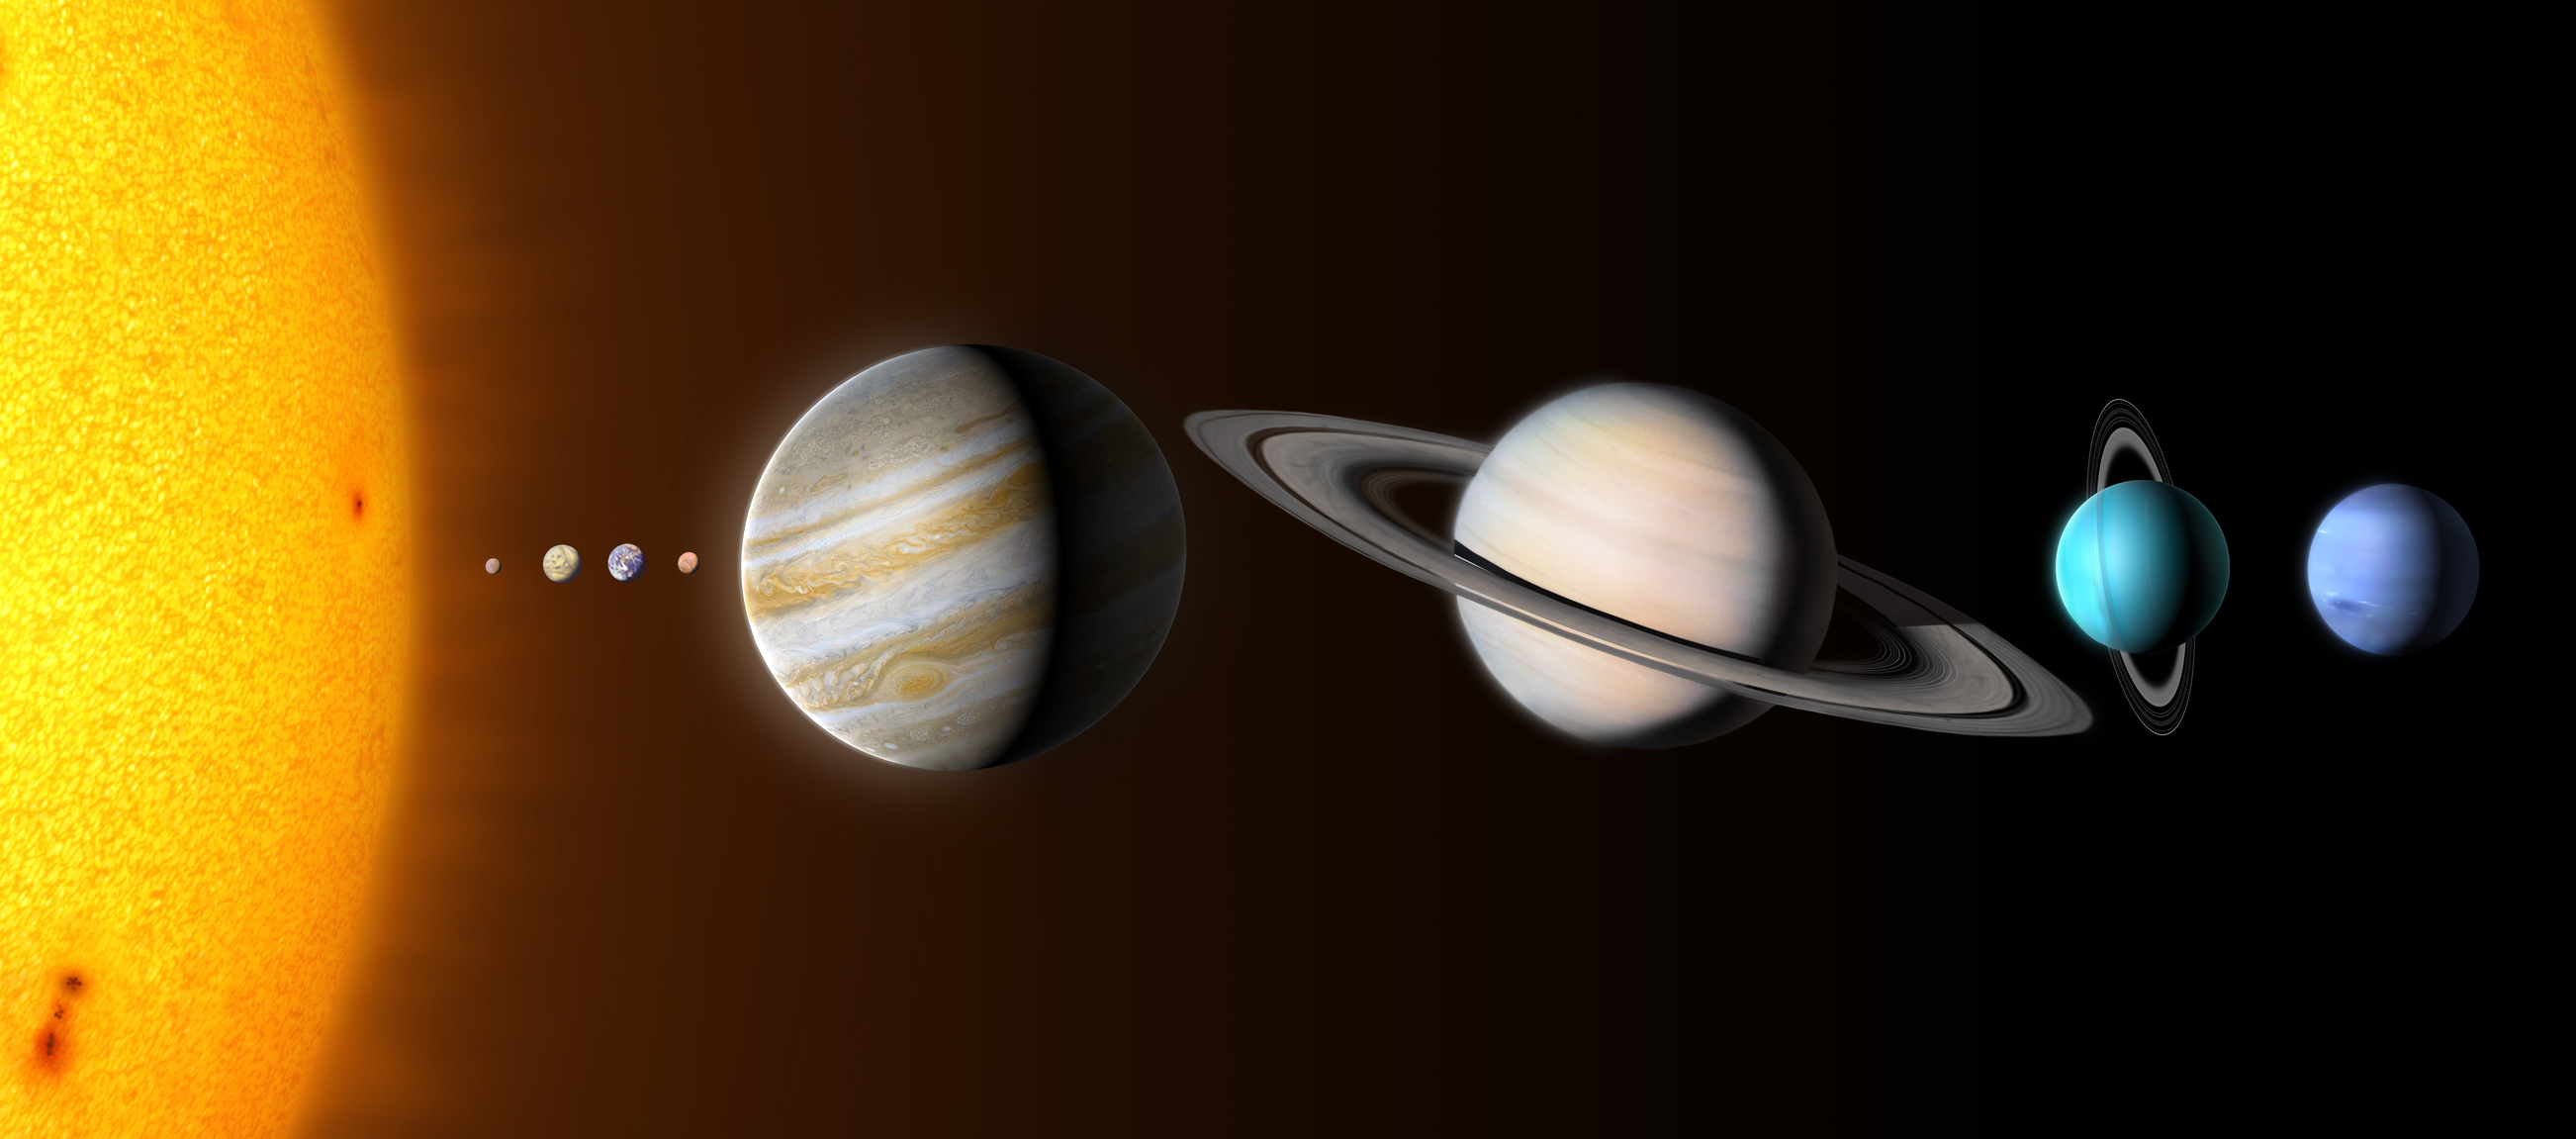 an illustration showing the planets of the solar system to scale